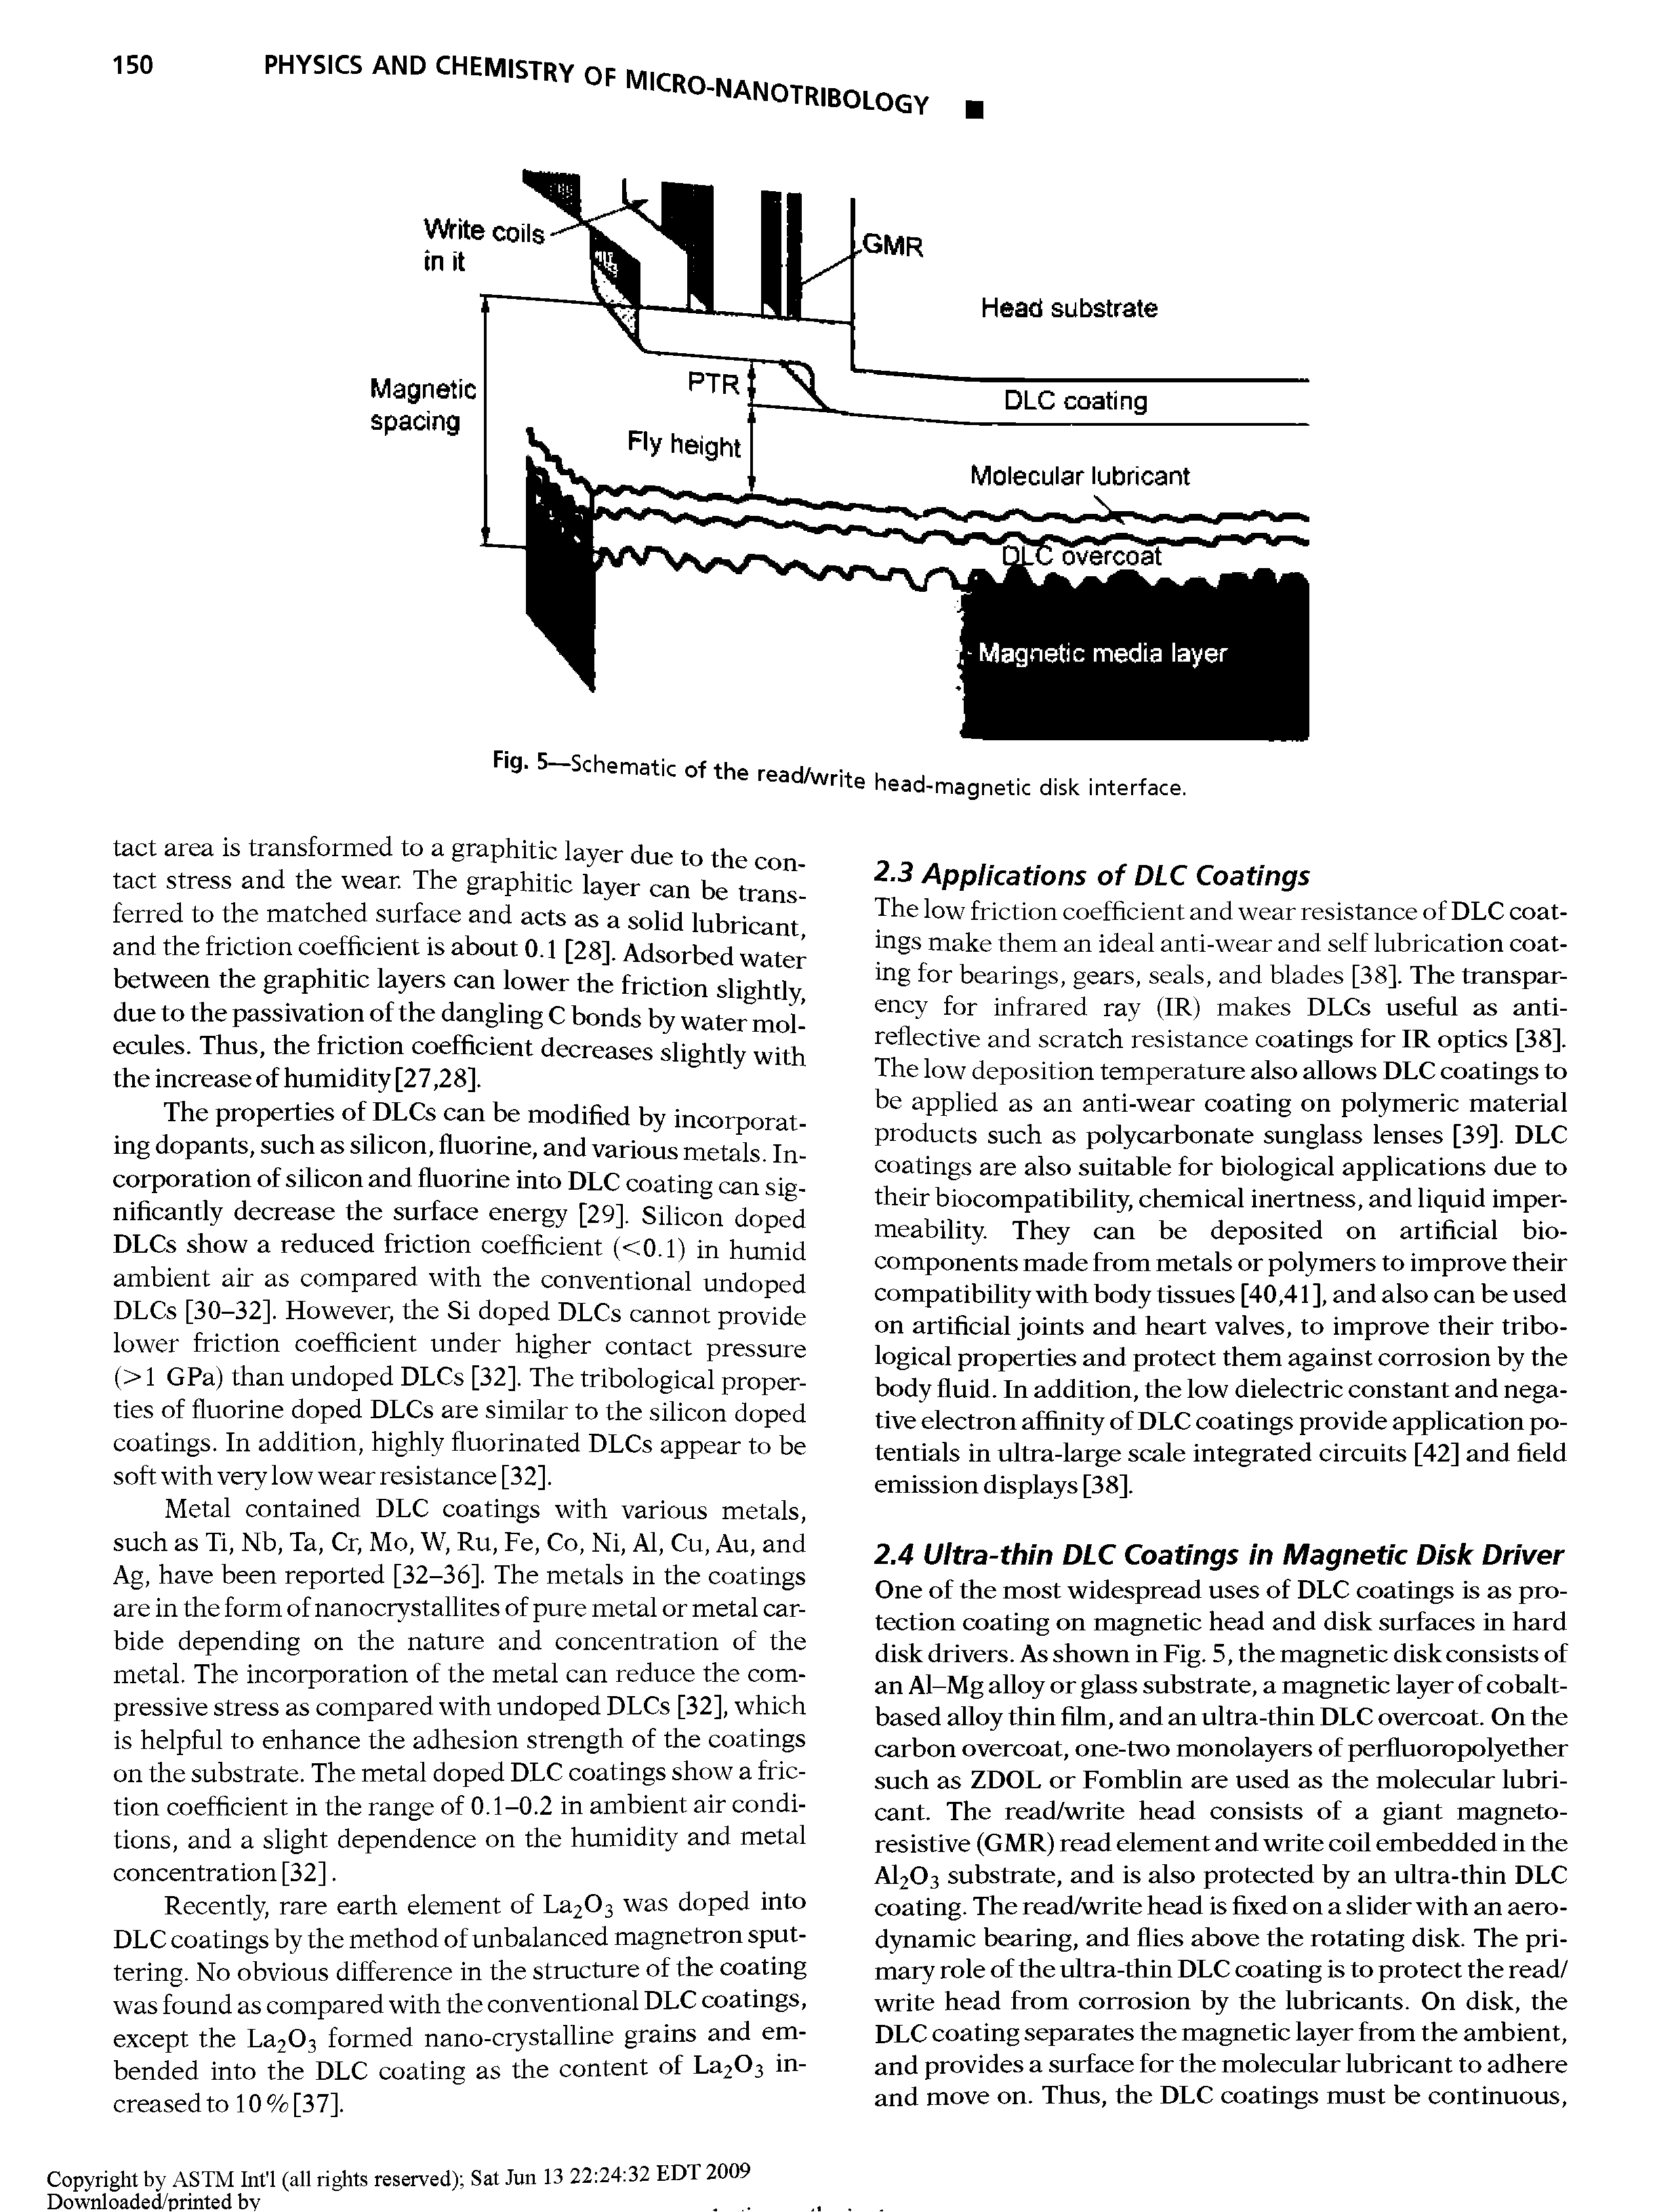 Fig. 5 Schematic of the read/write head-magnetic disk interface.